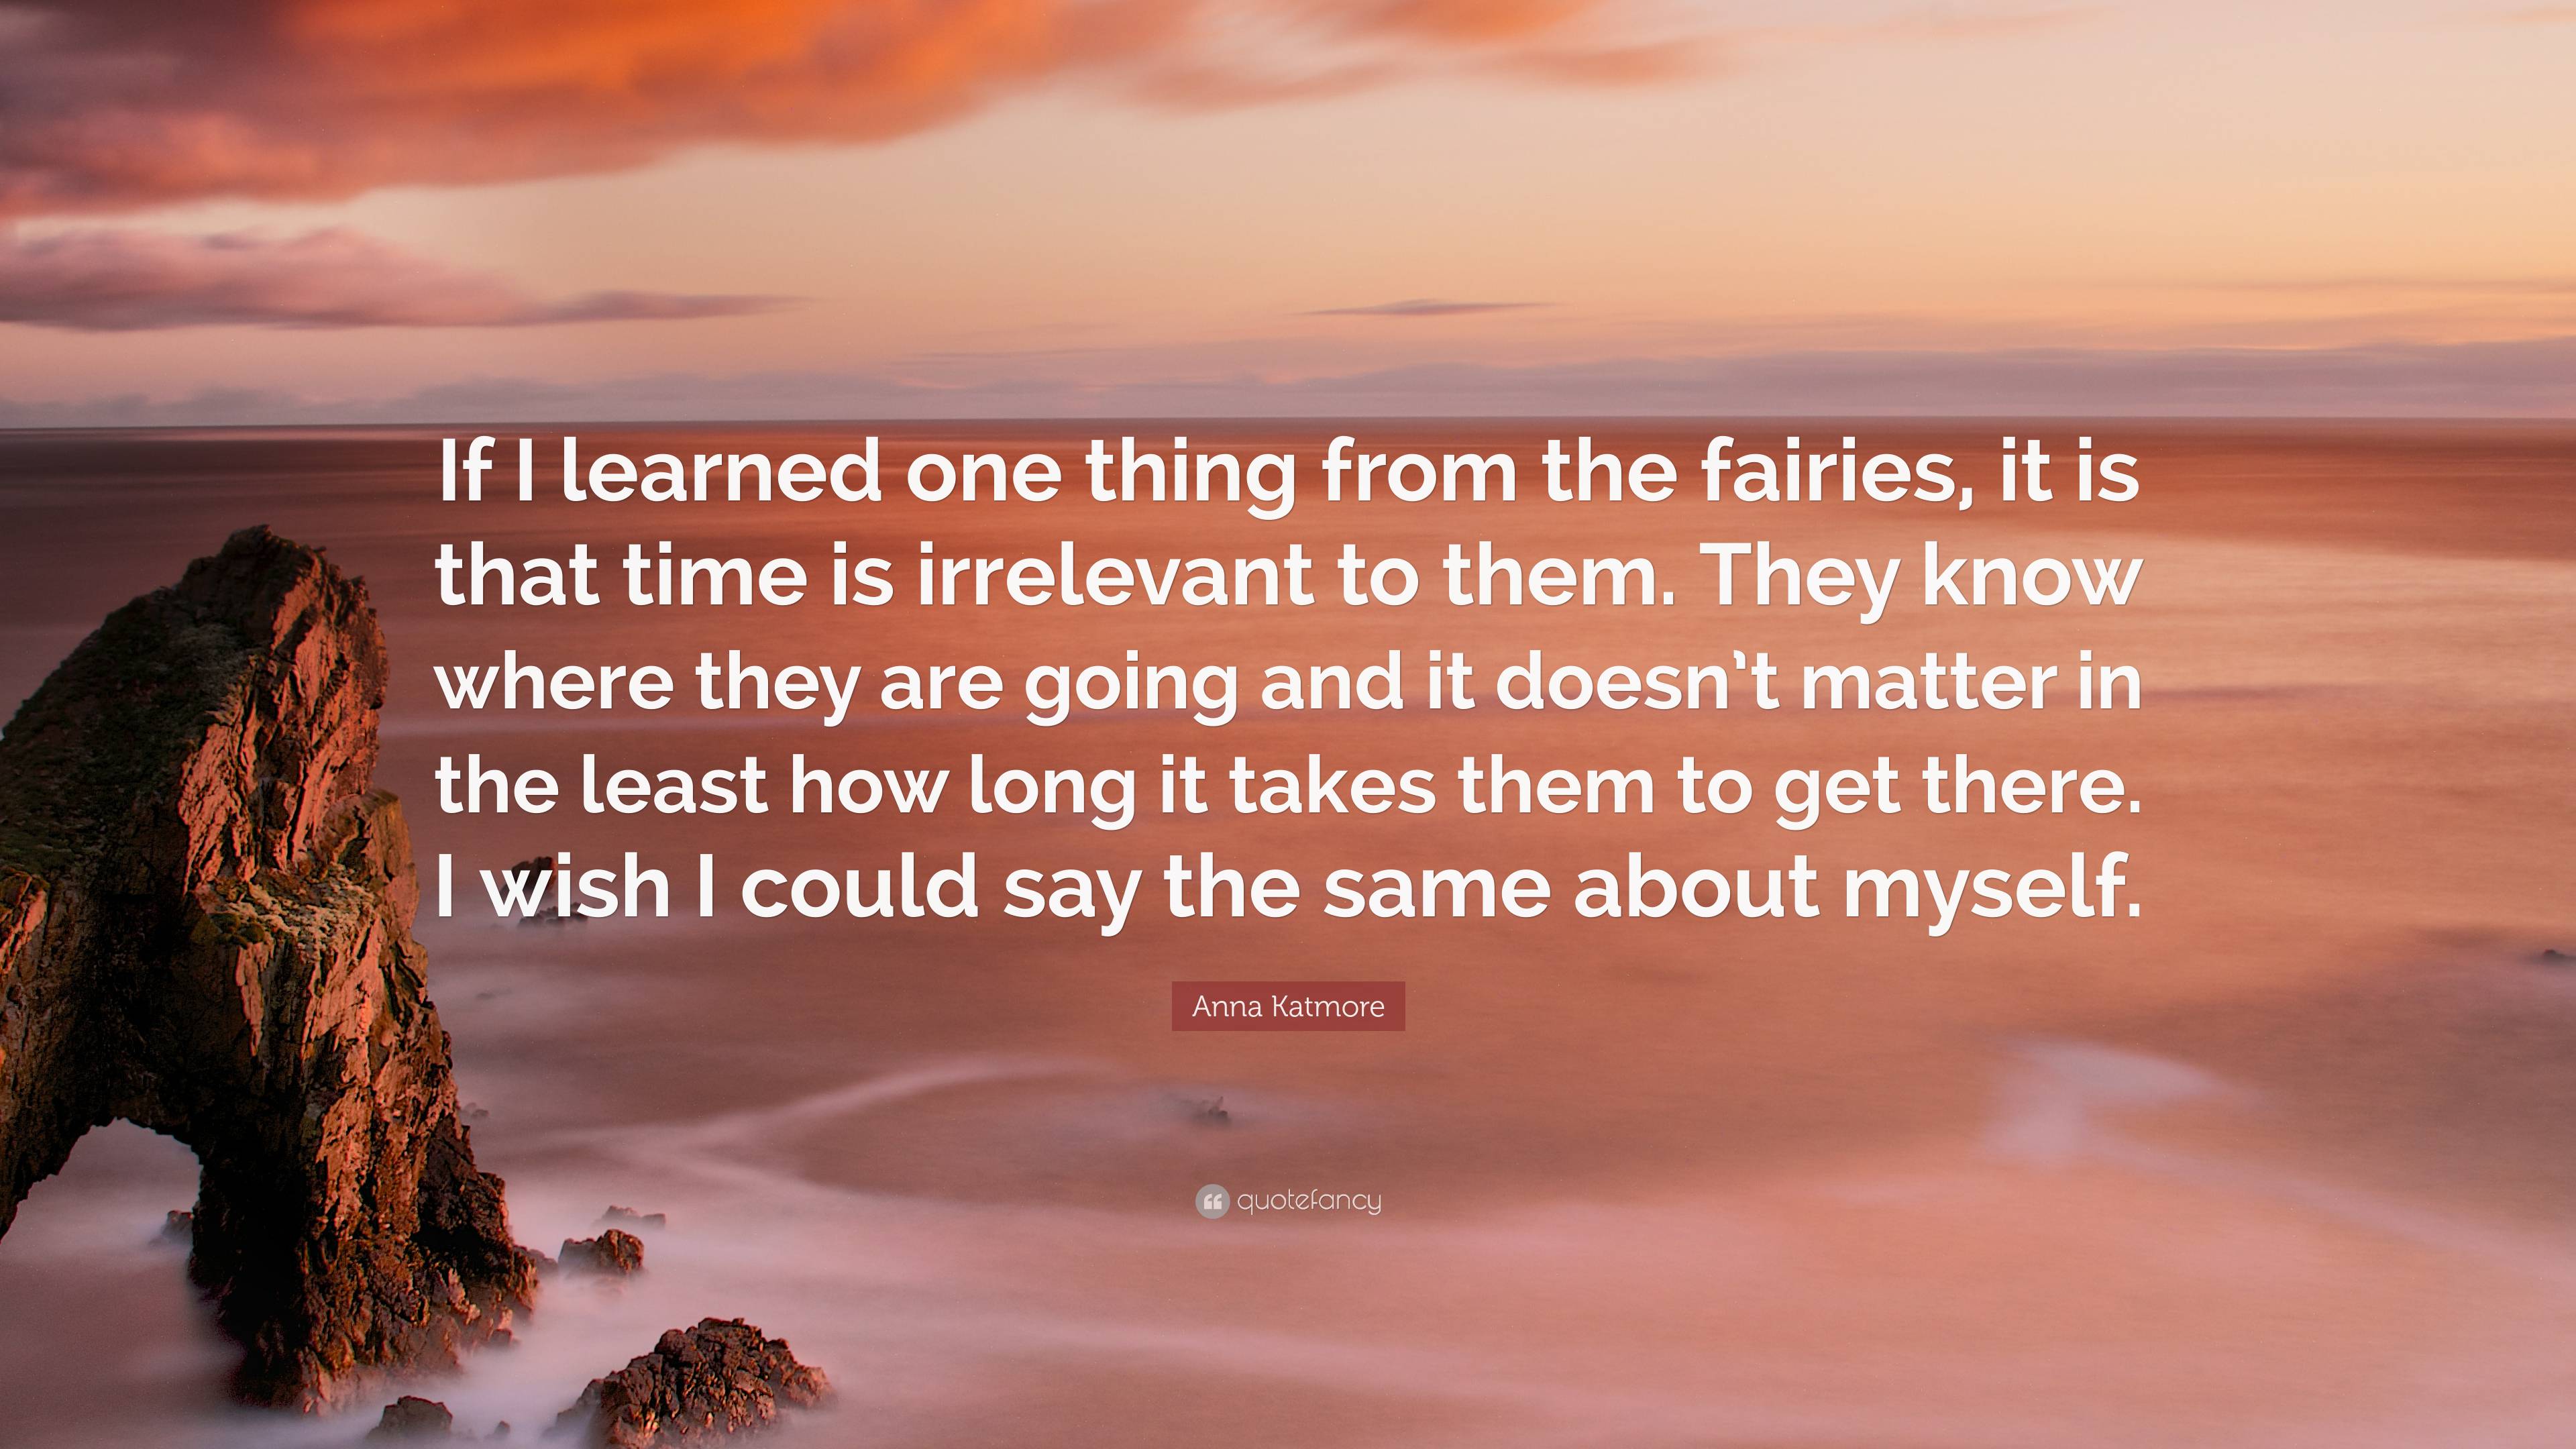 Anna Katmore Quote: “If I learned one thing from the fairies, it is ...